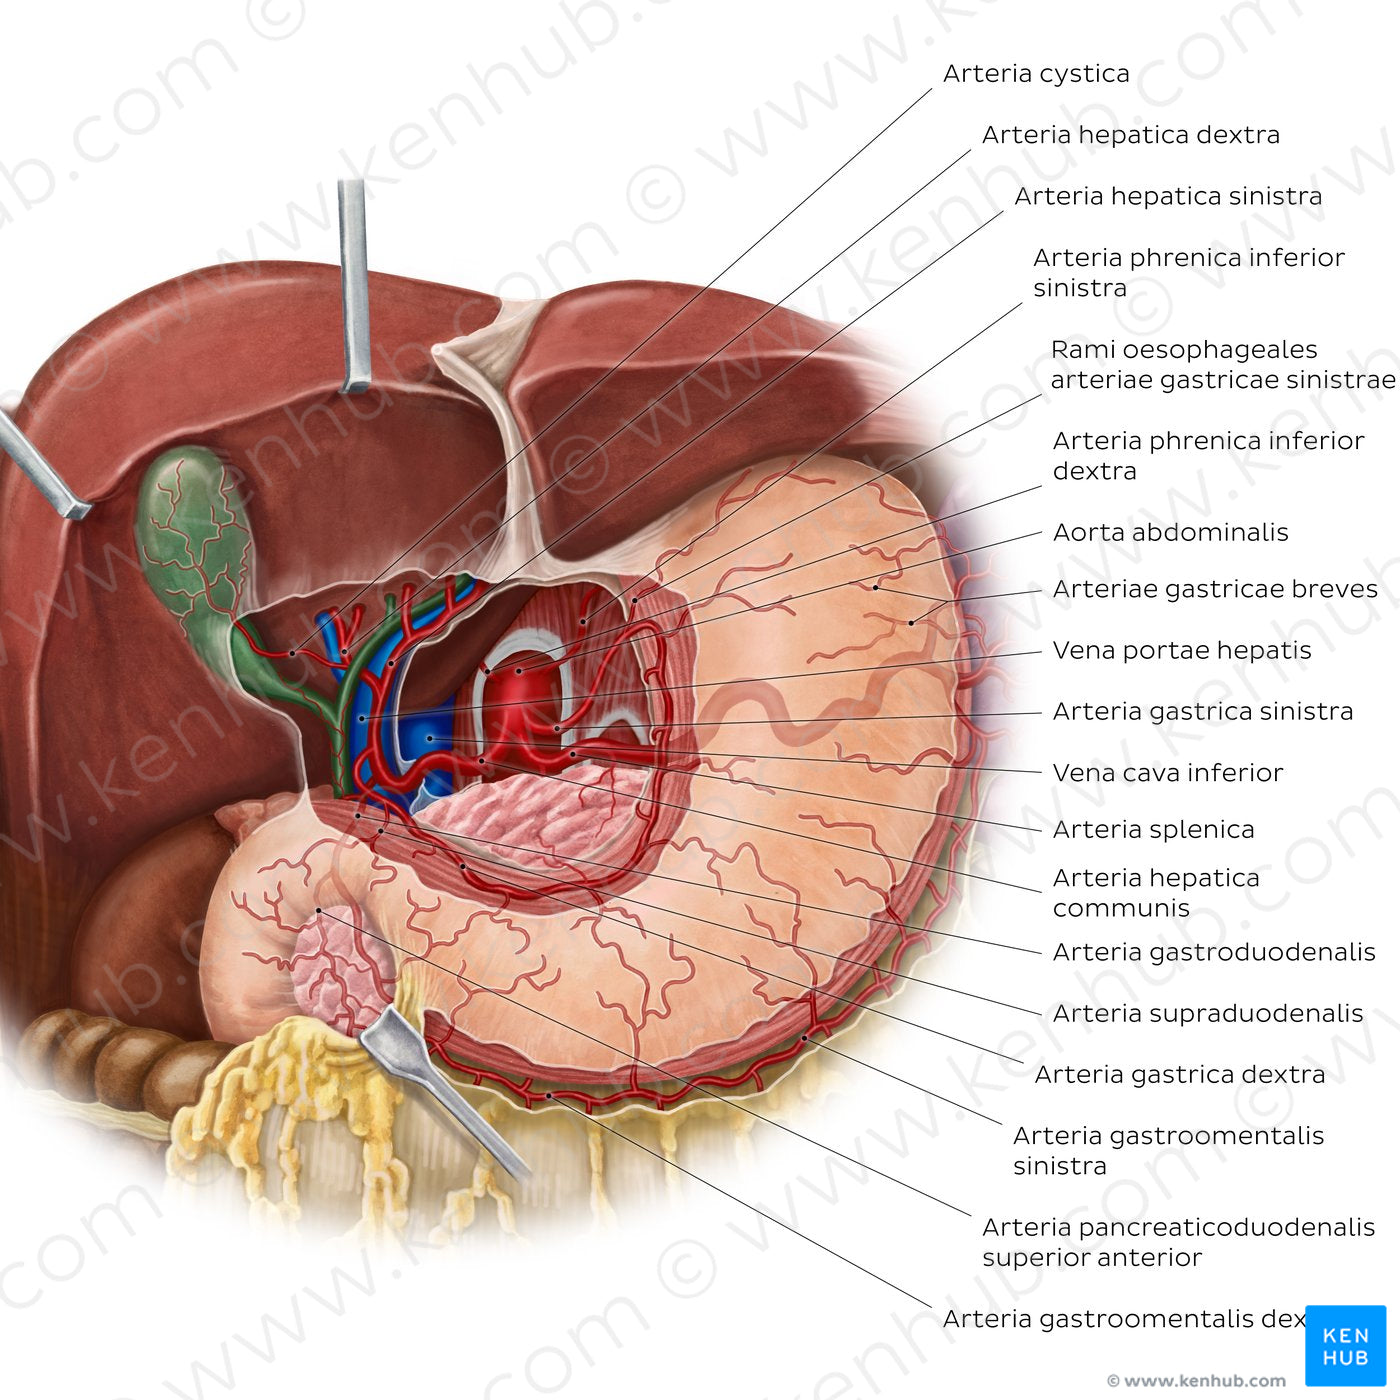 Arteries of the stomach, liver and spleen (Latin)